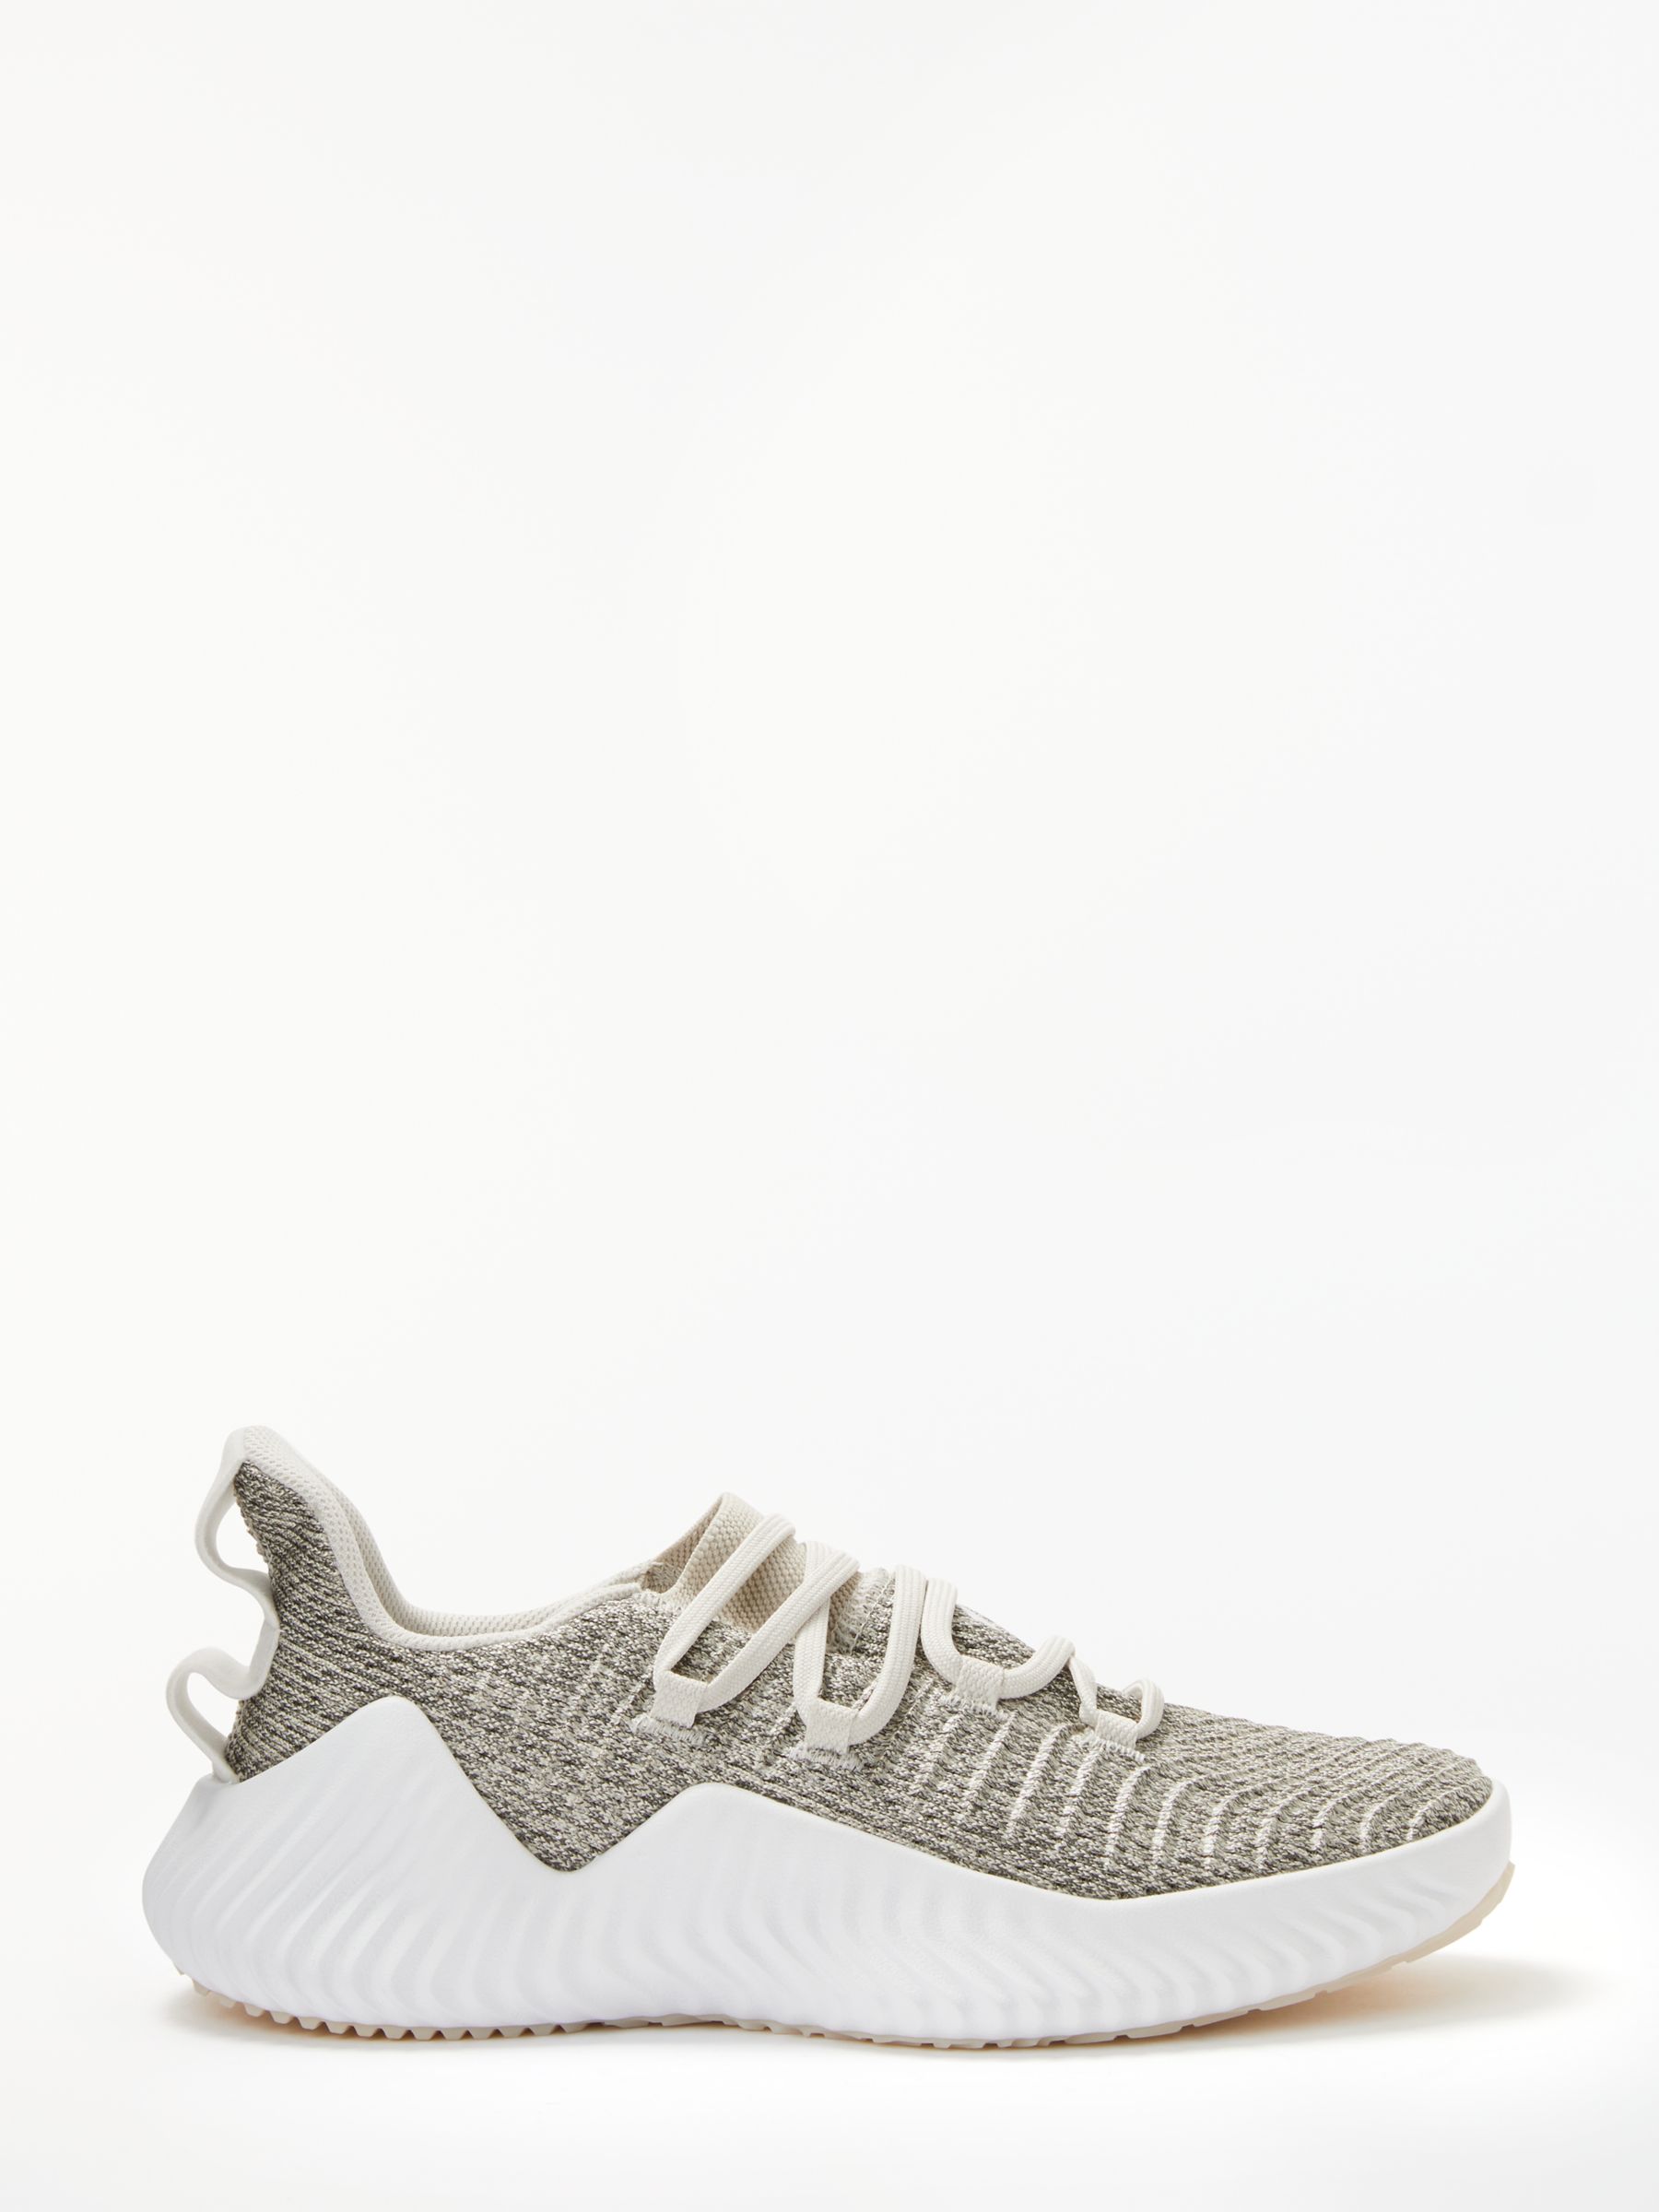 alphabounce trainer womens